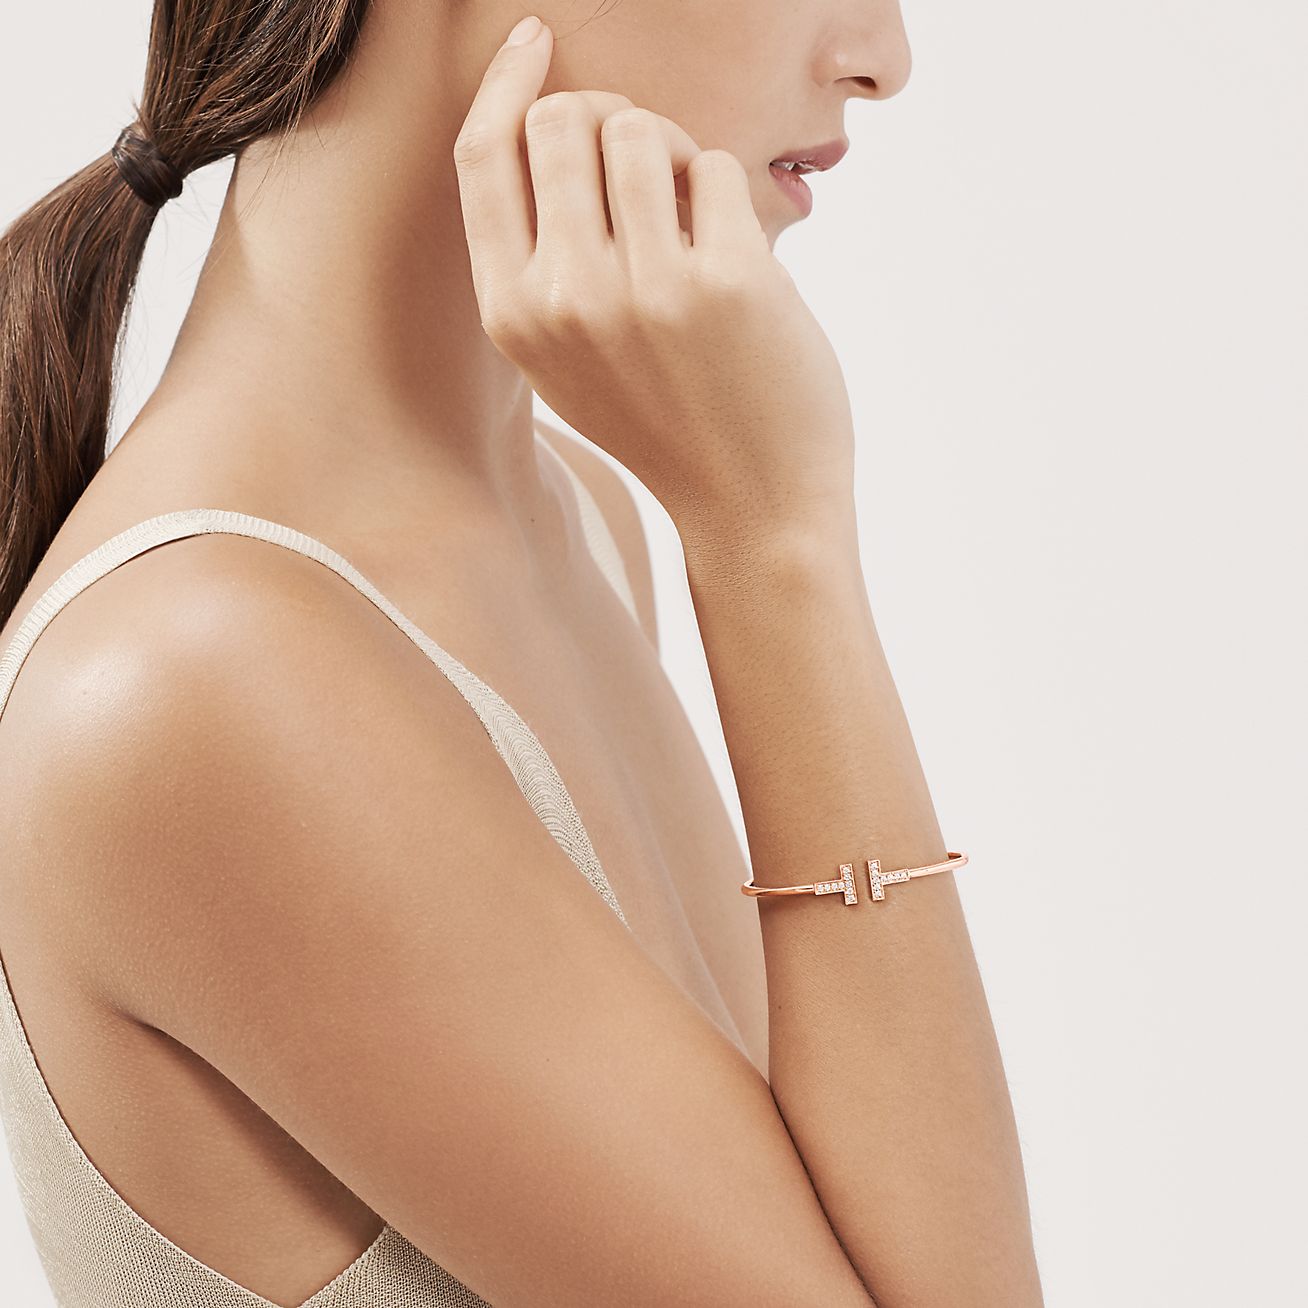 tiffany and co wire bracelet